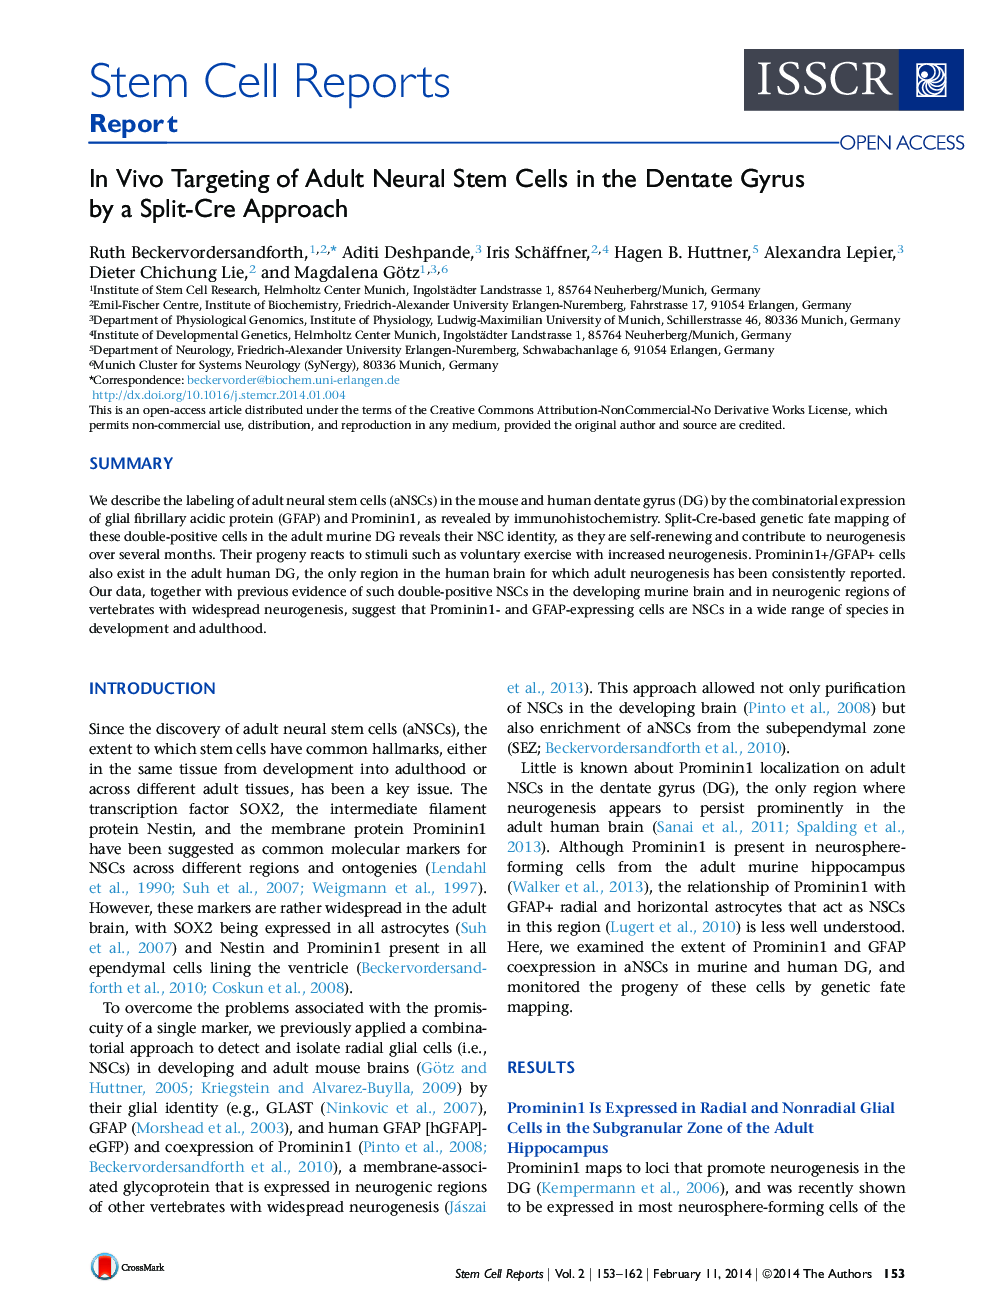 In Vivo Targeting of Adult Neural Stem Cells in the Dentate Gyrus by a Split-Cre Approach 